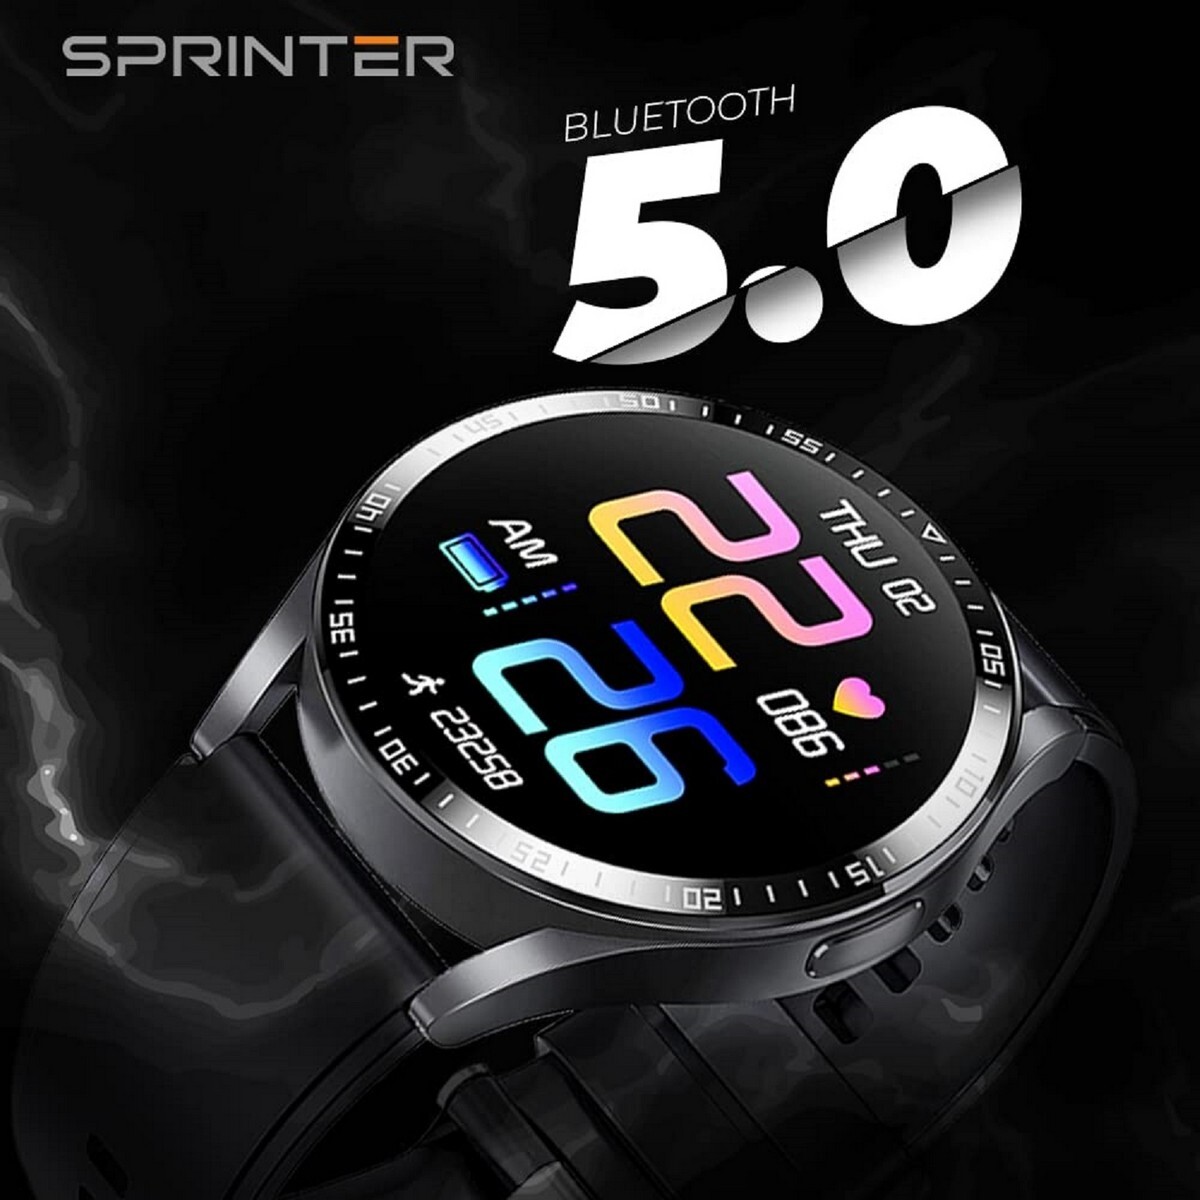 Corseca JUST Sprinter Smart Watch 1.28 inches LCD Color Display with 240x240 Resolution, Built-in 300 mAh Battery,Black